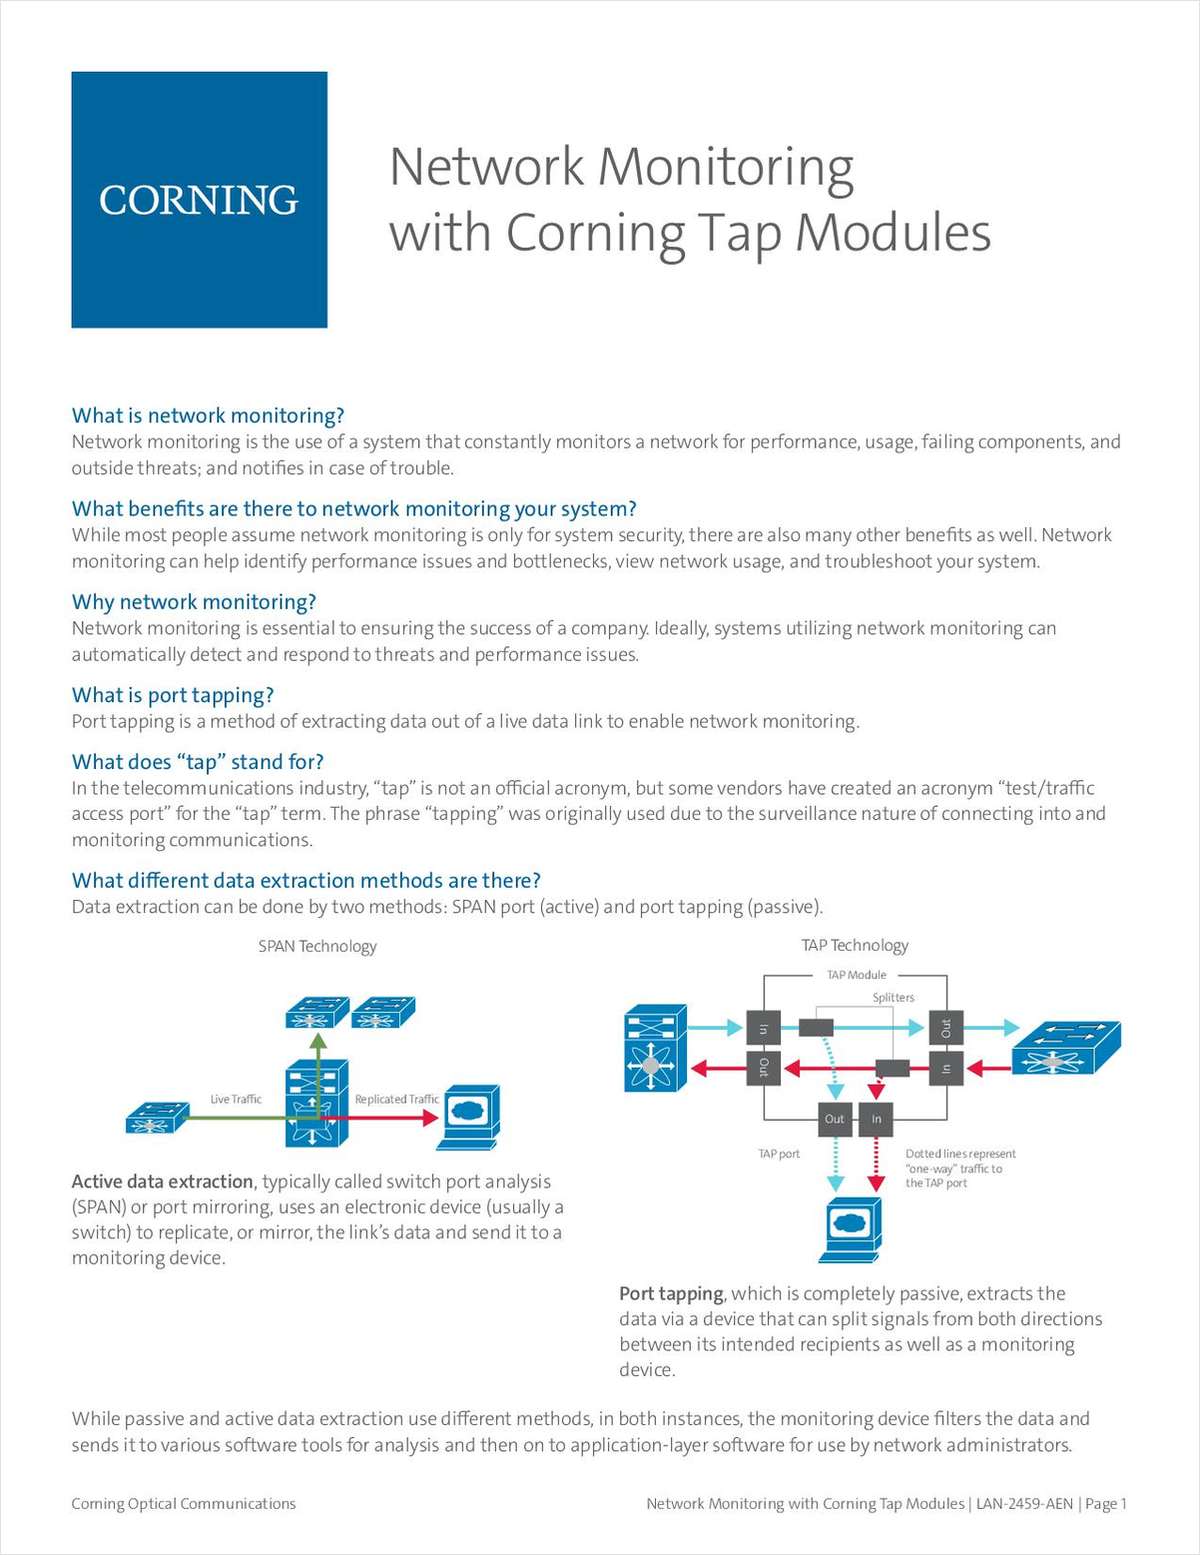 Network Monitoring with Corning Tap Modules